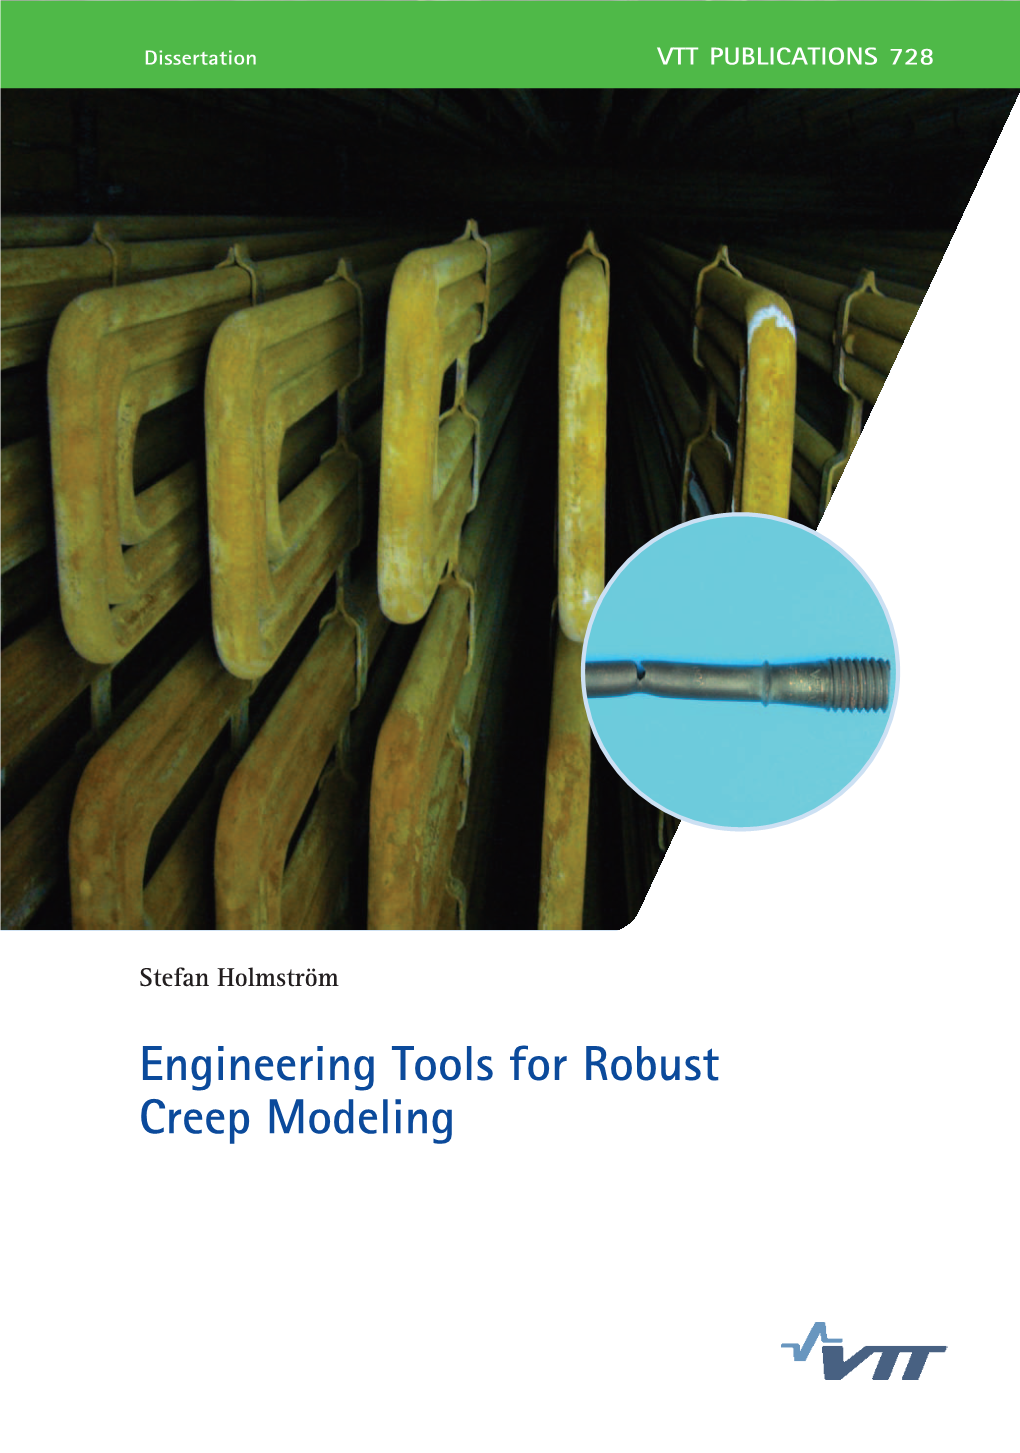 Engineering Tools for Robust Creep Modeling